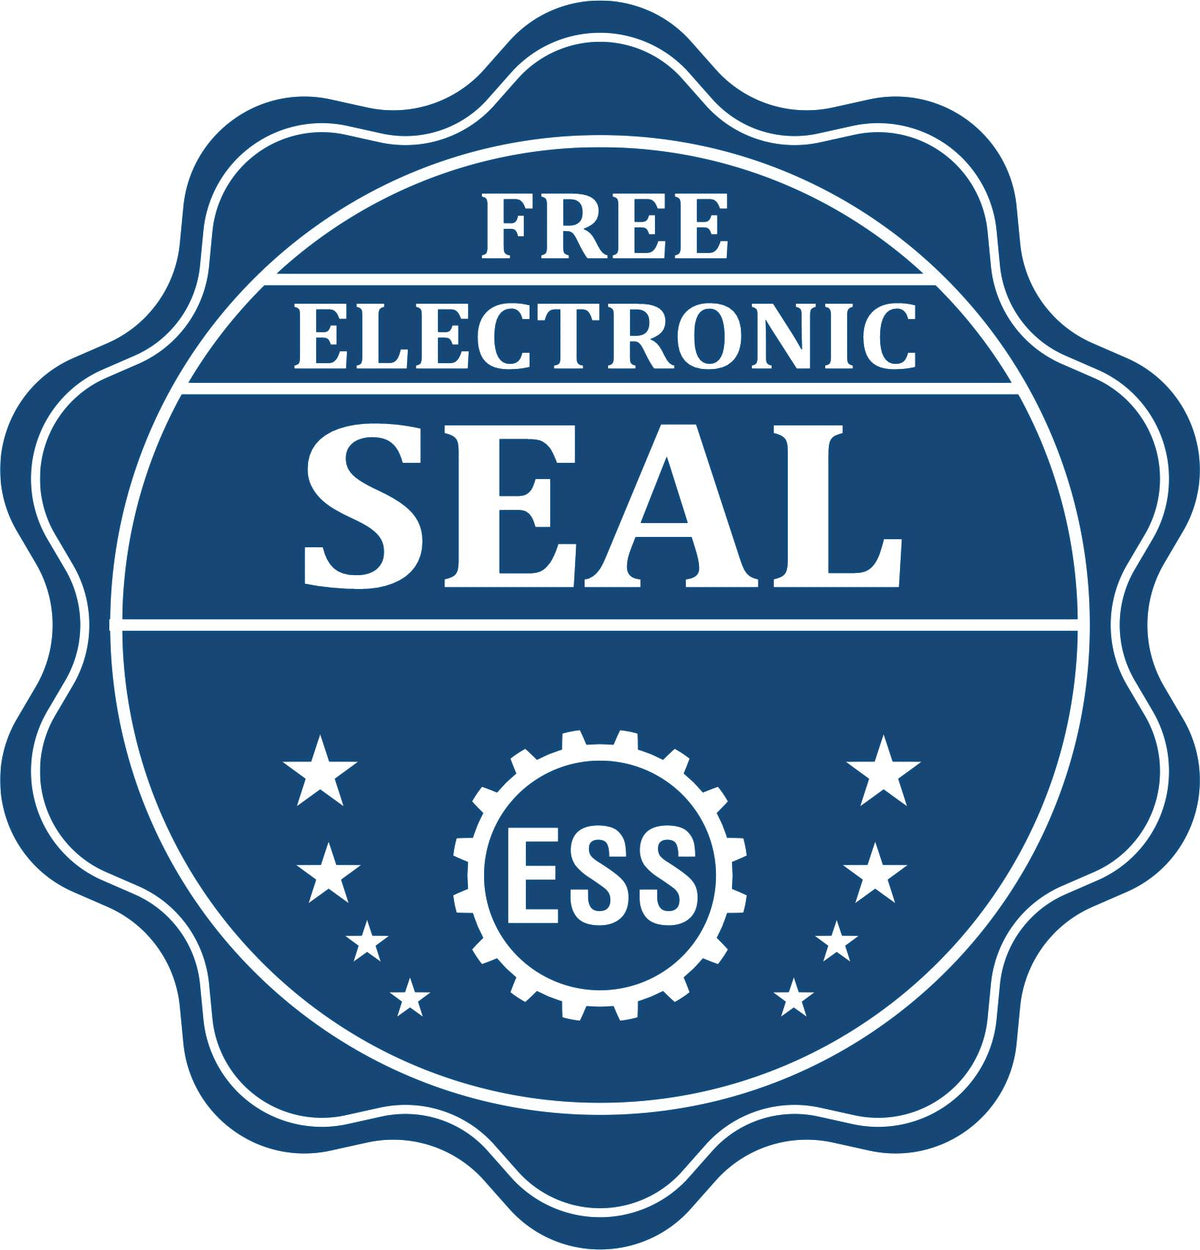 A badge showing a free electronic seal for the Gift Louisiana Land Surveyor Seal with stars and the ESS gear on the emblem.